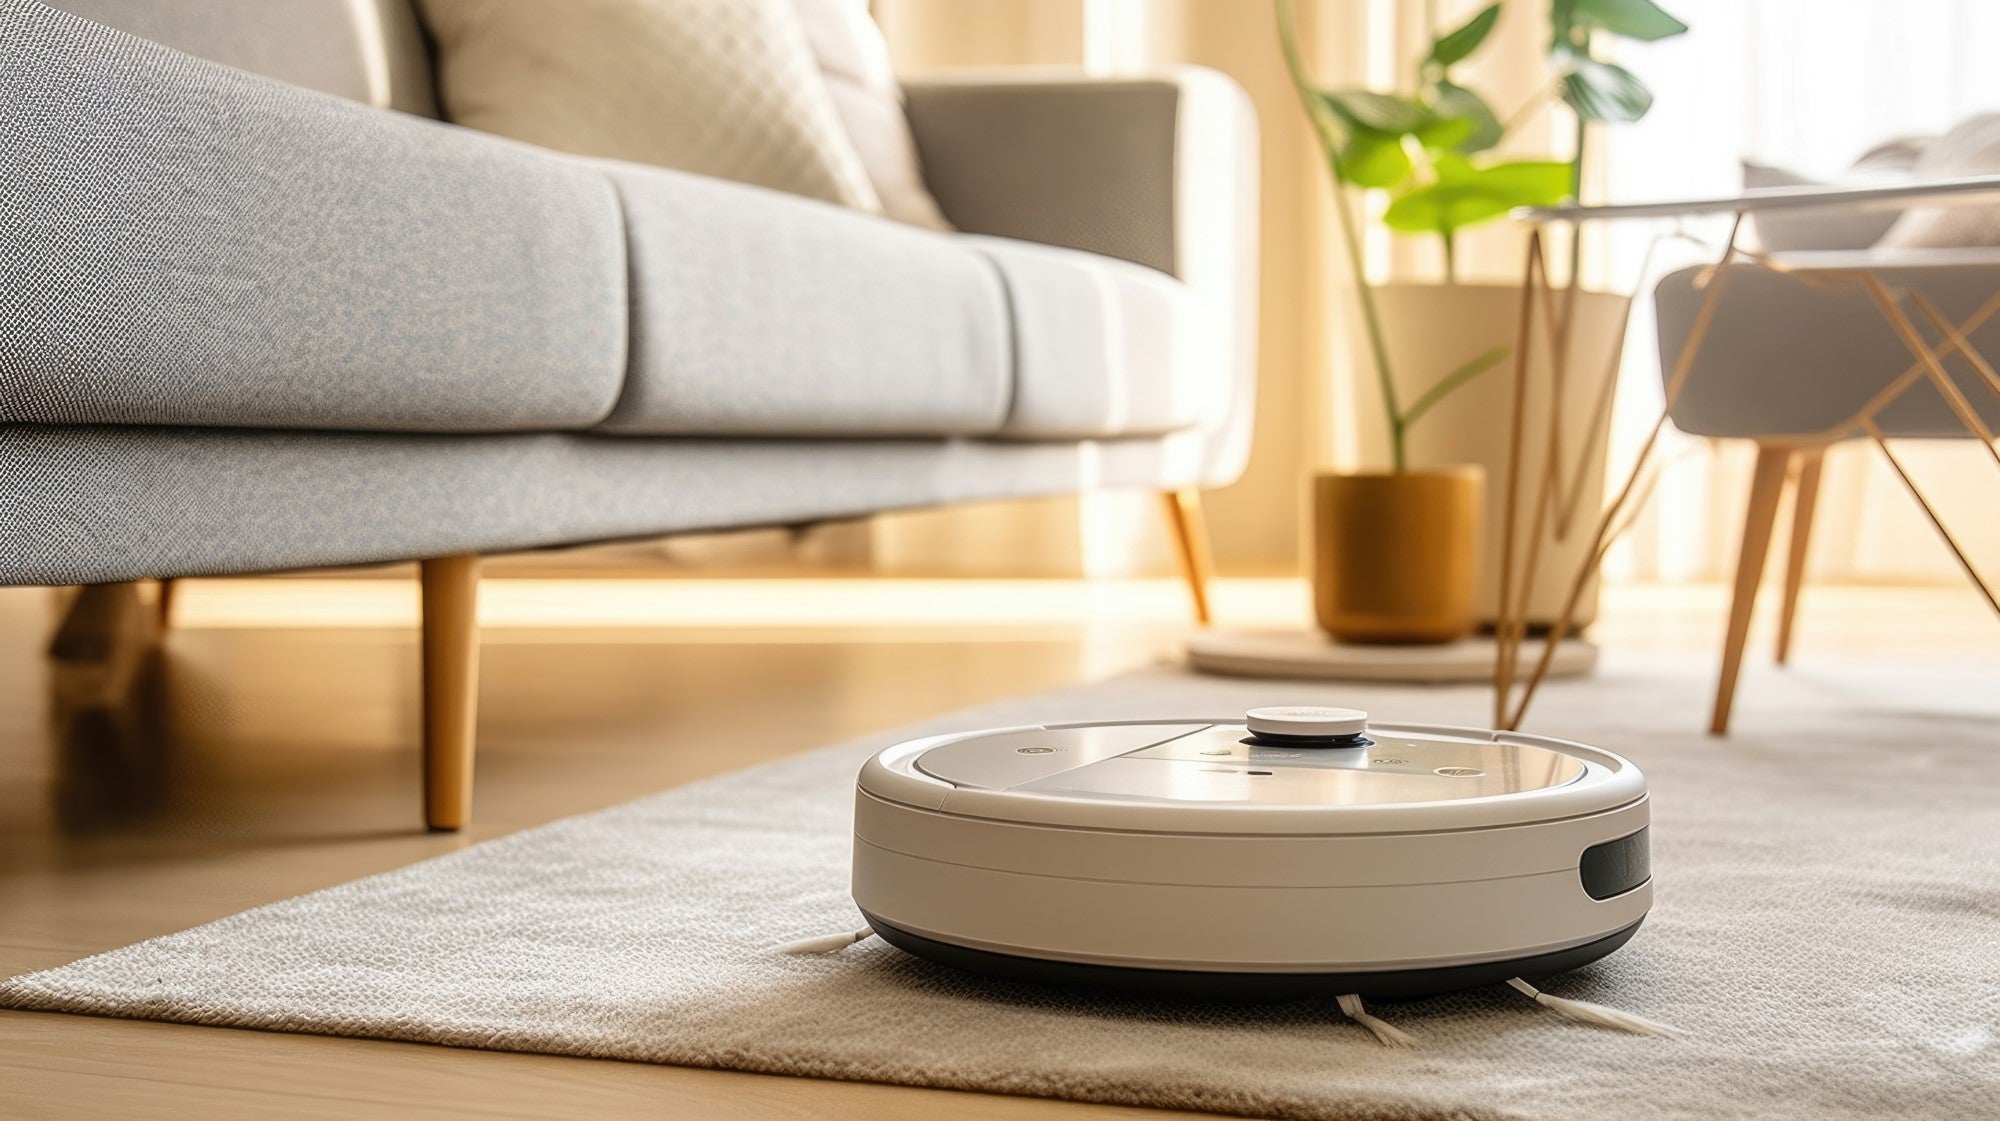 A robotic vacuum on an area rug next to a couch with thin legs.